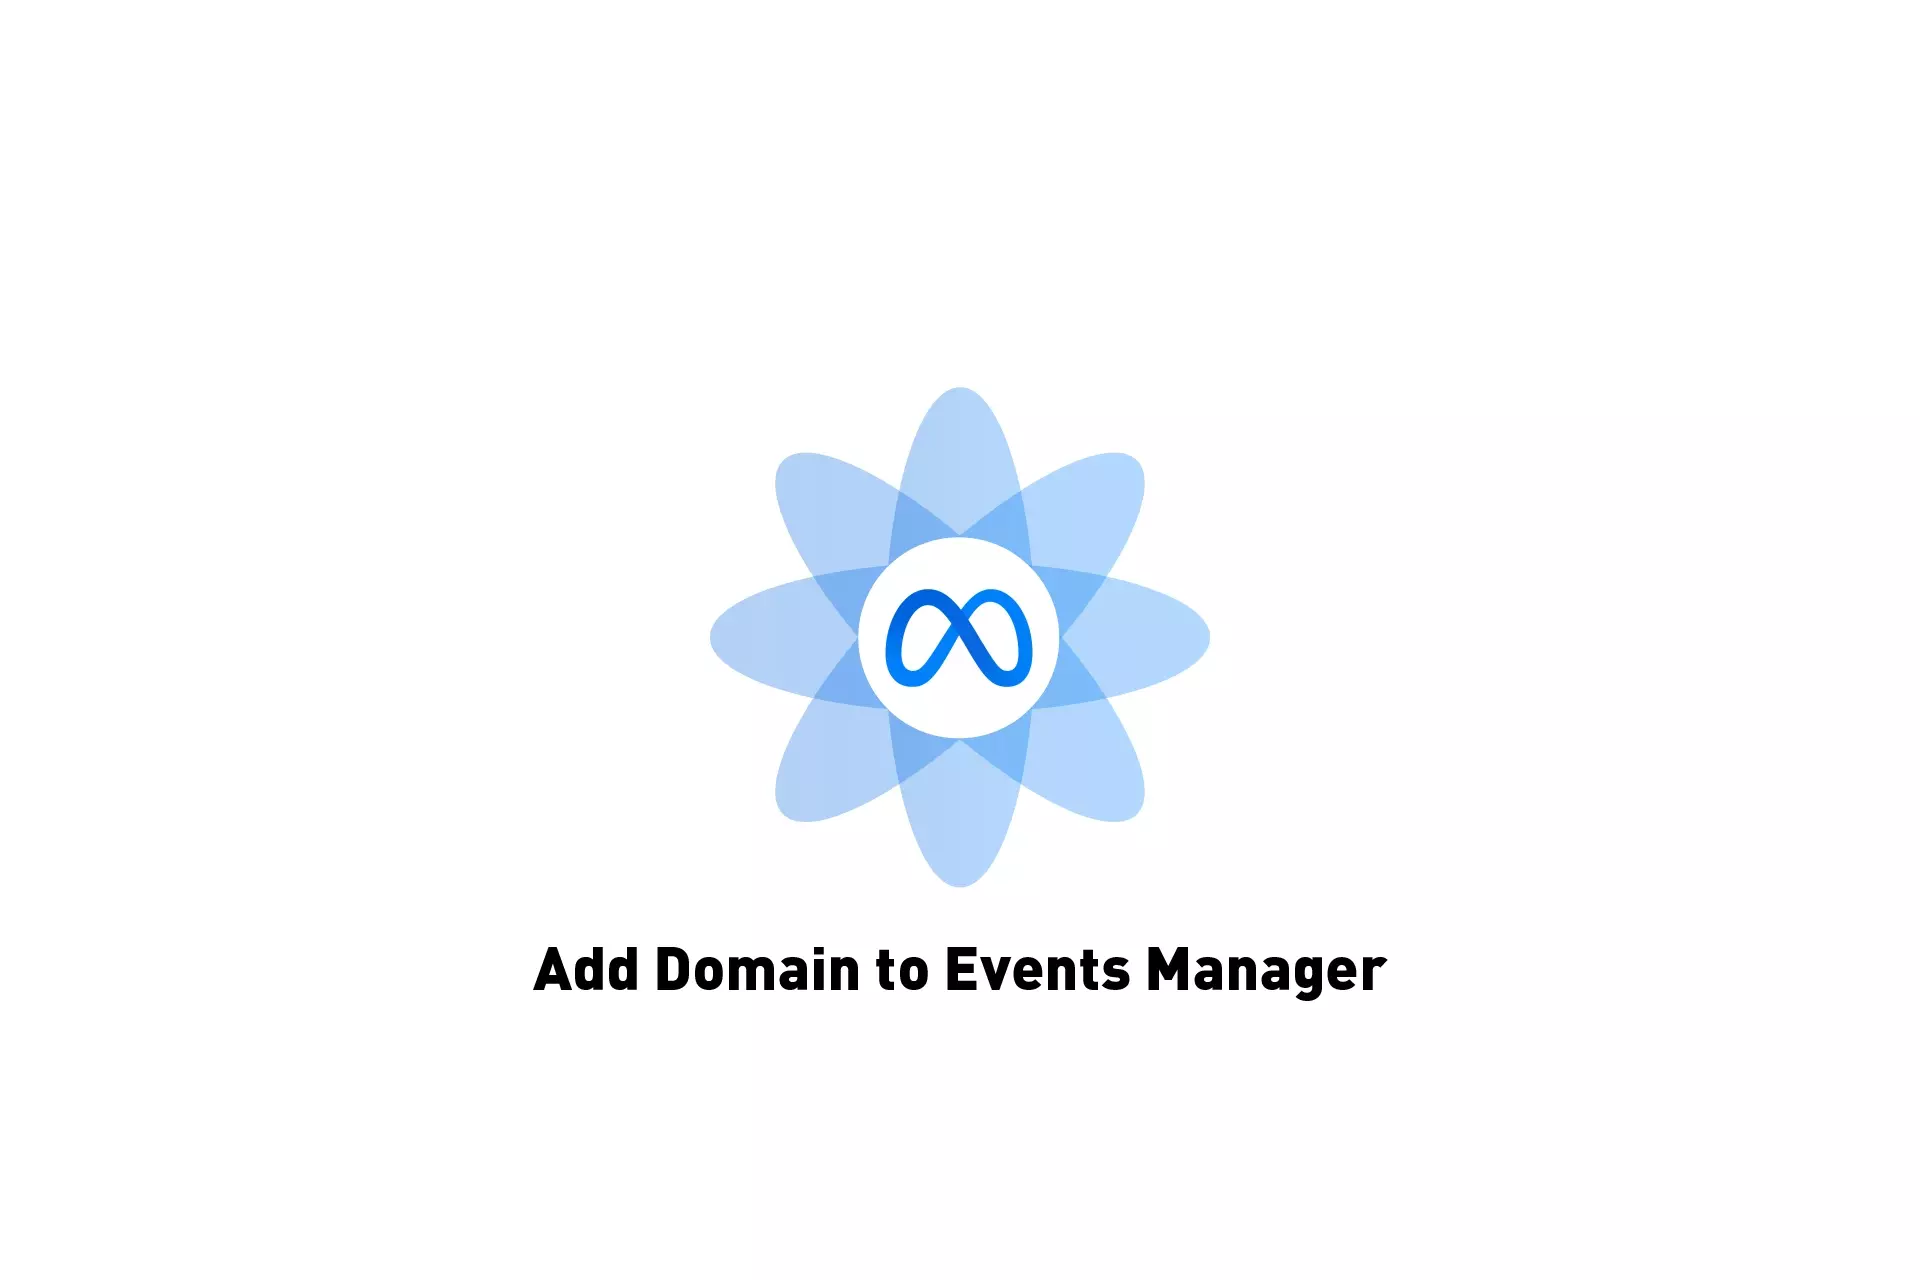 A flower that represents Meta, beneath it sits the text "Add Domain to Events Manager."